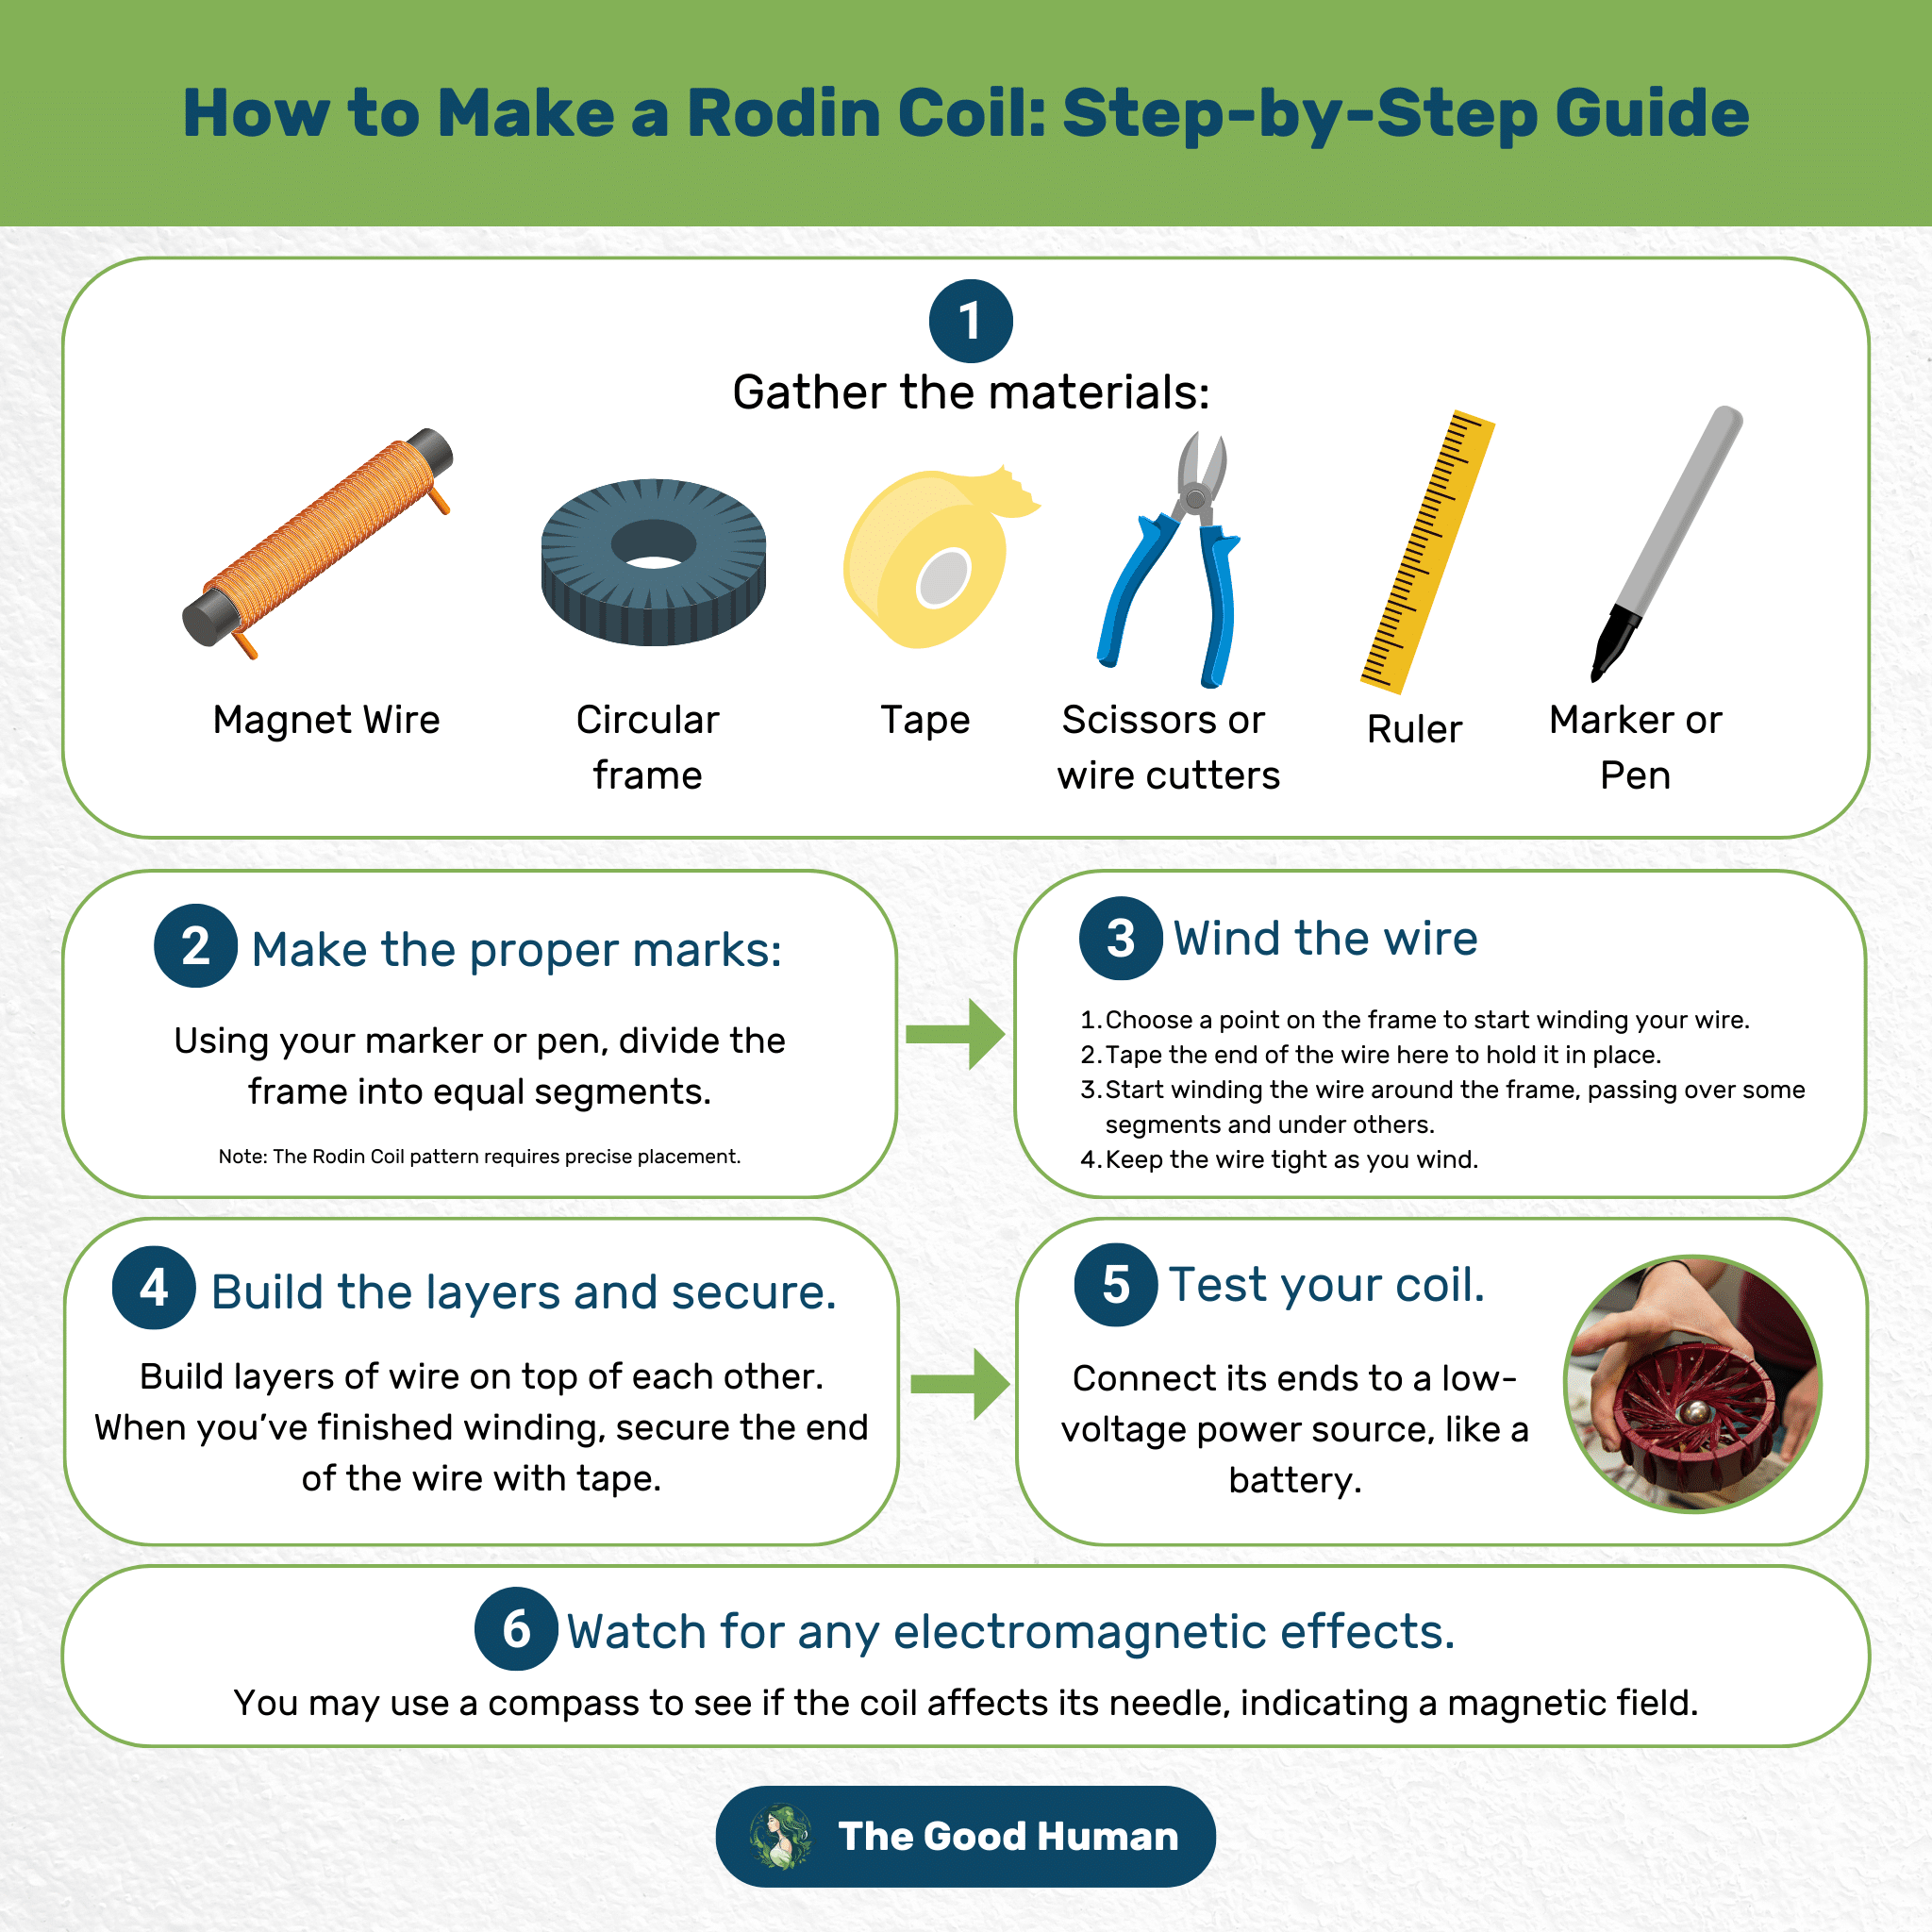 How to Make A Rodin Coil